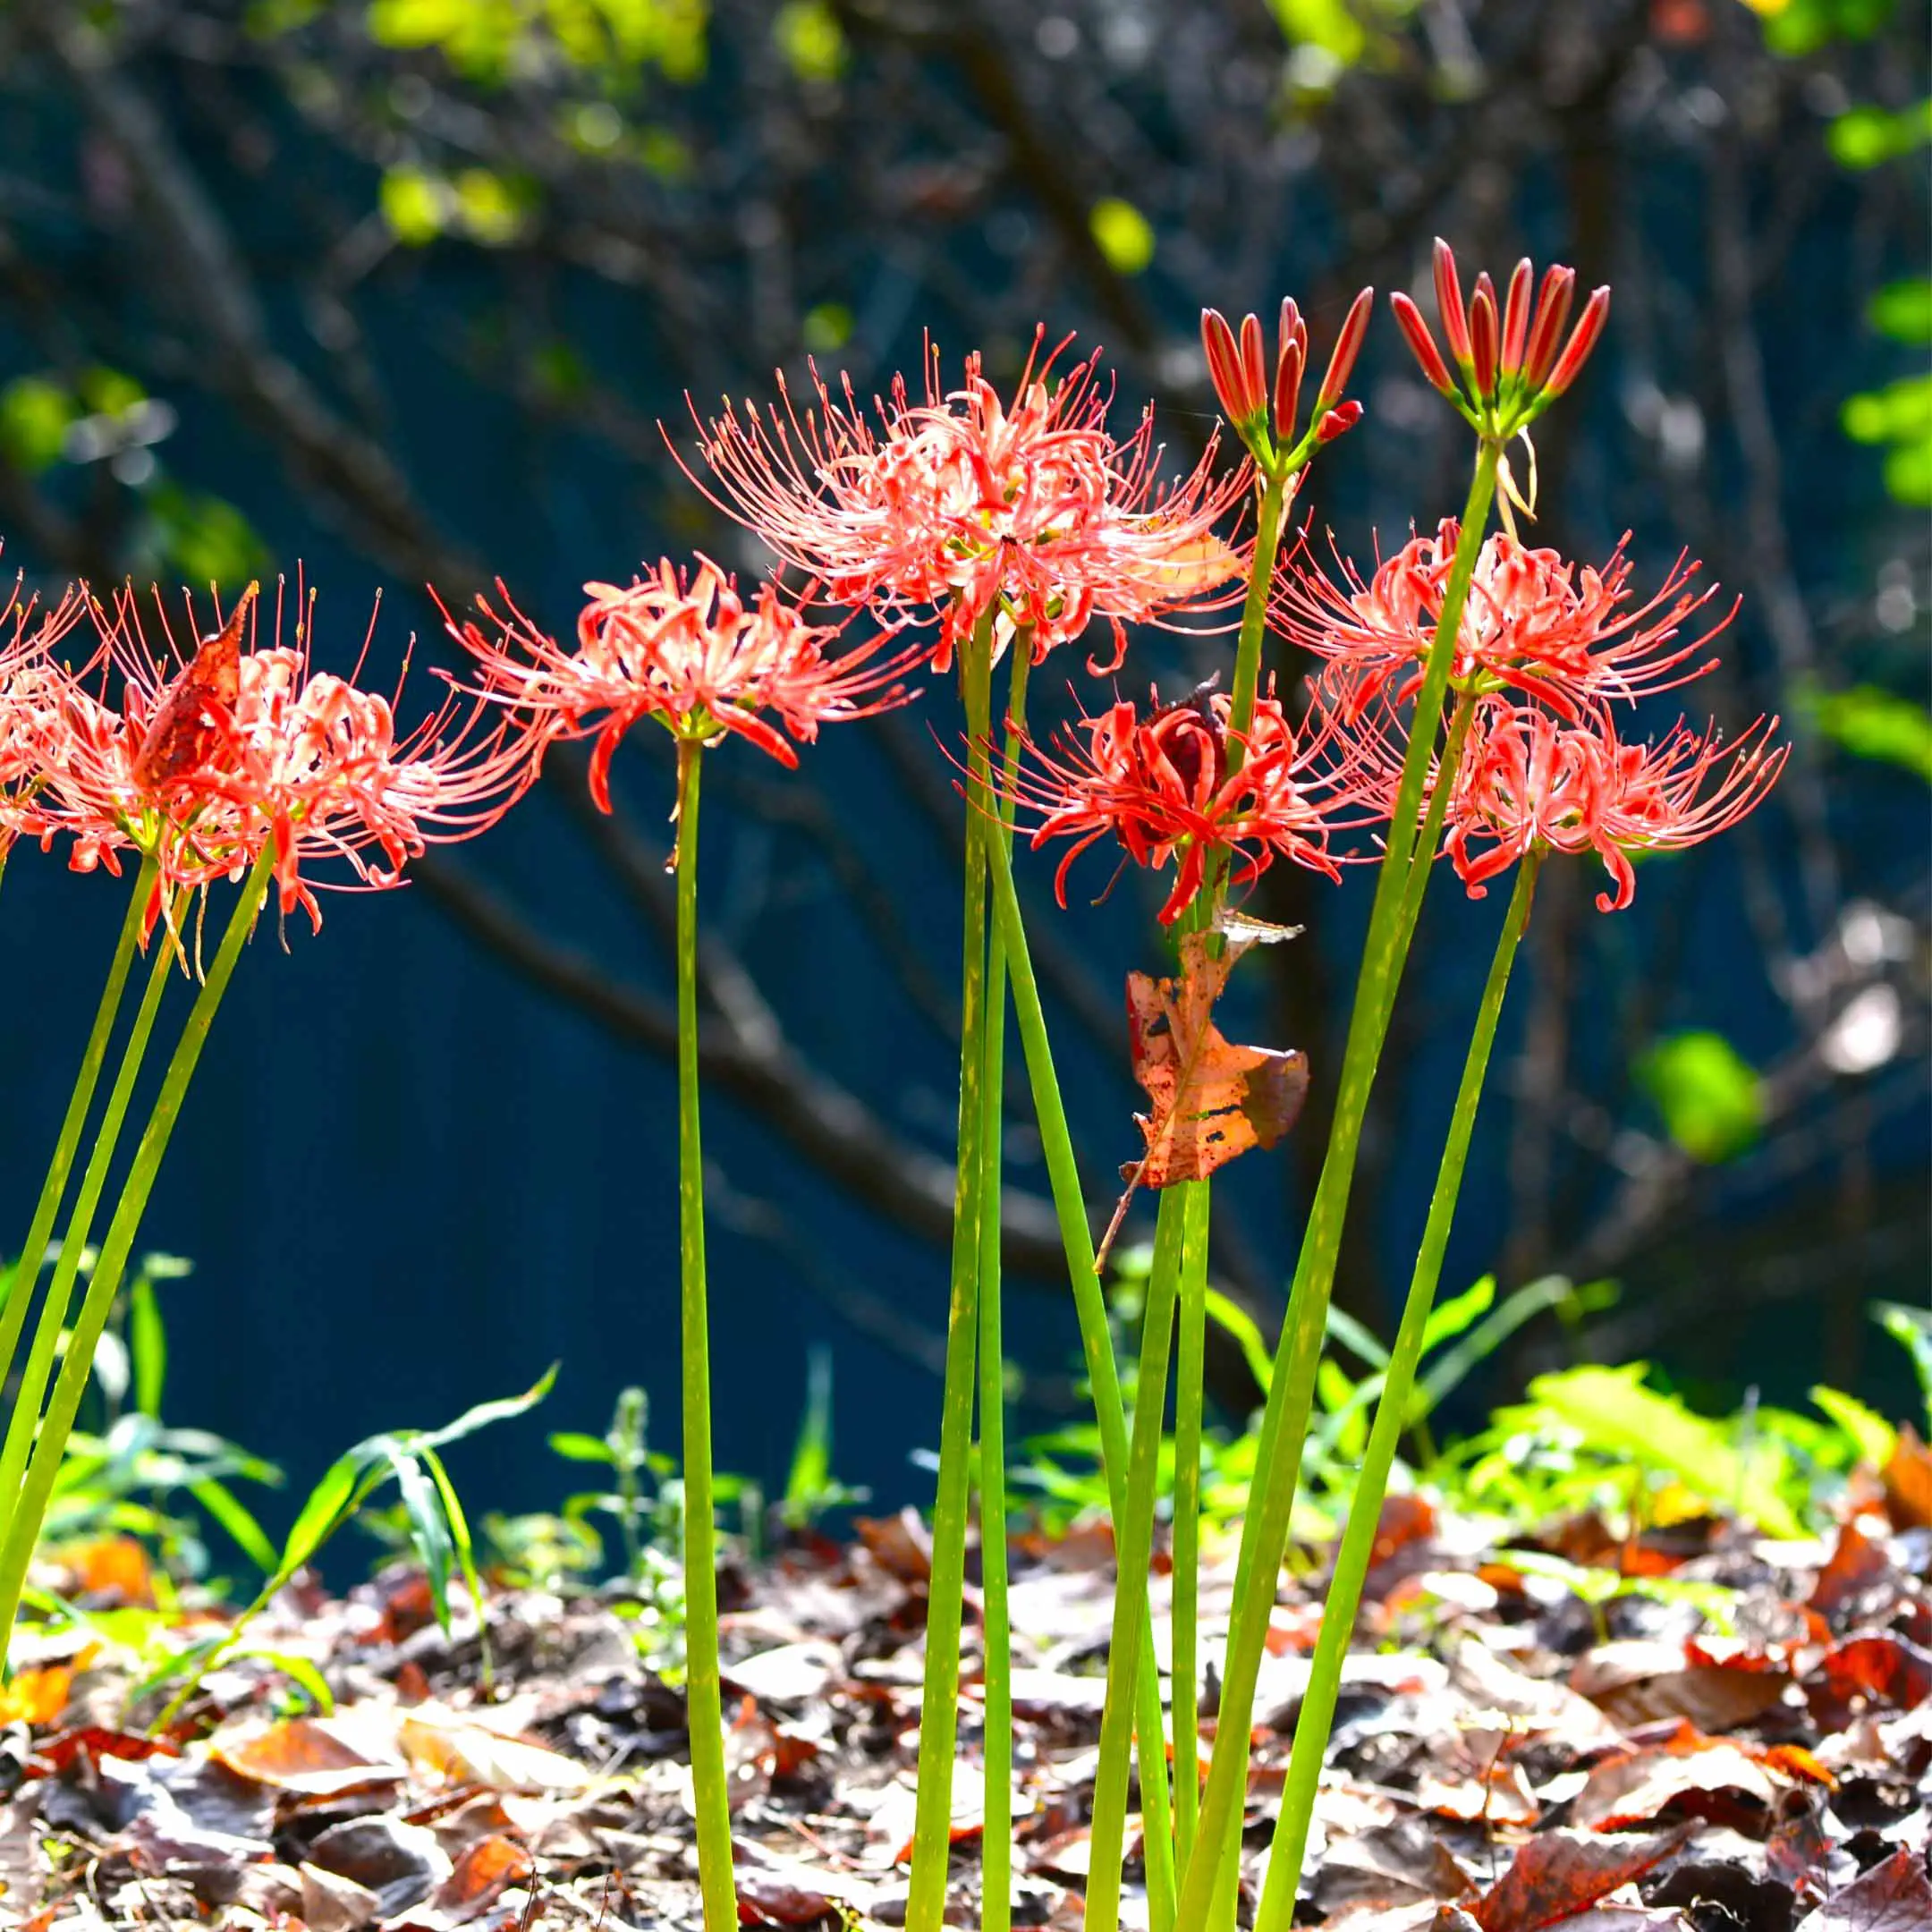 Red spider lily plants